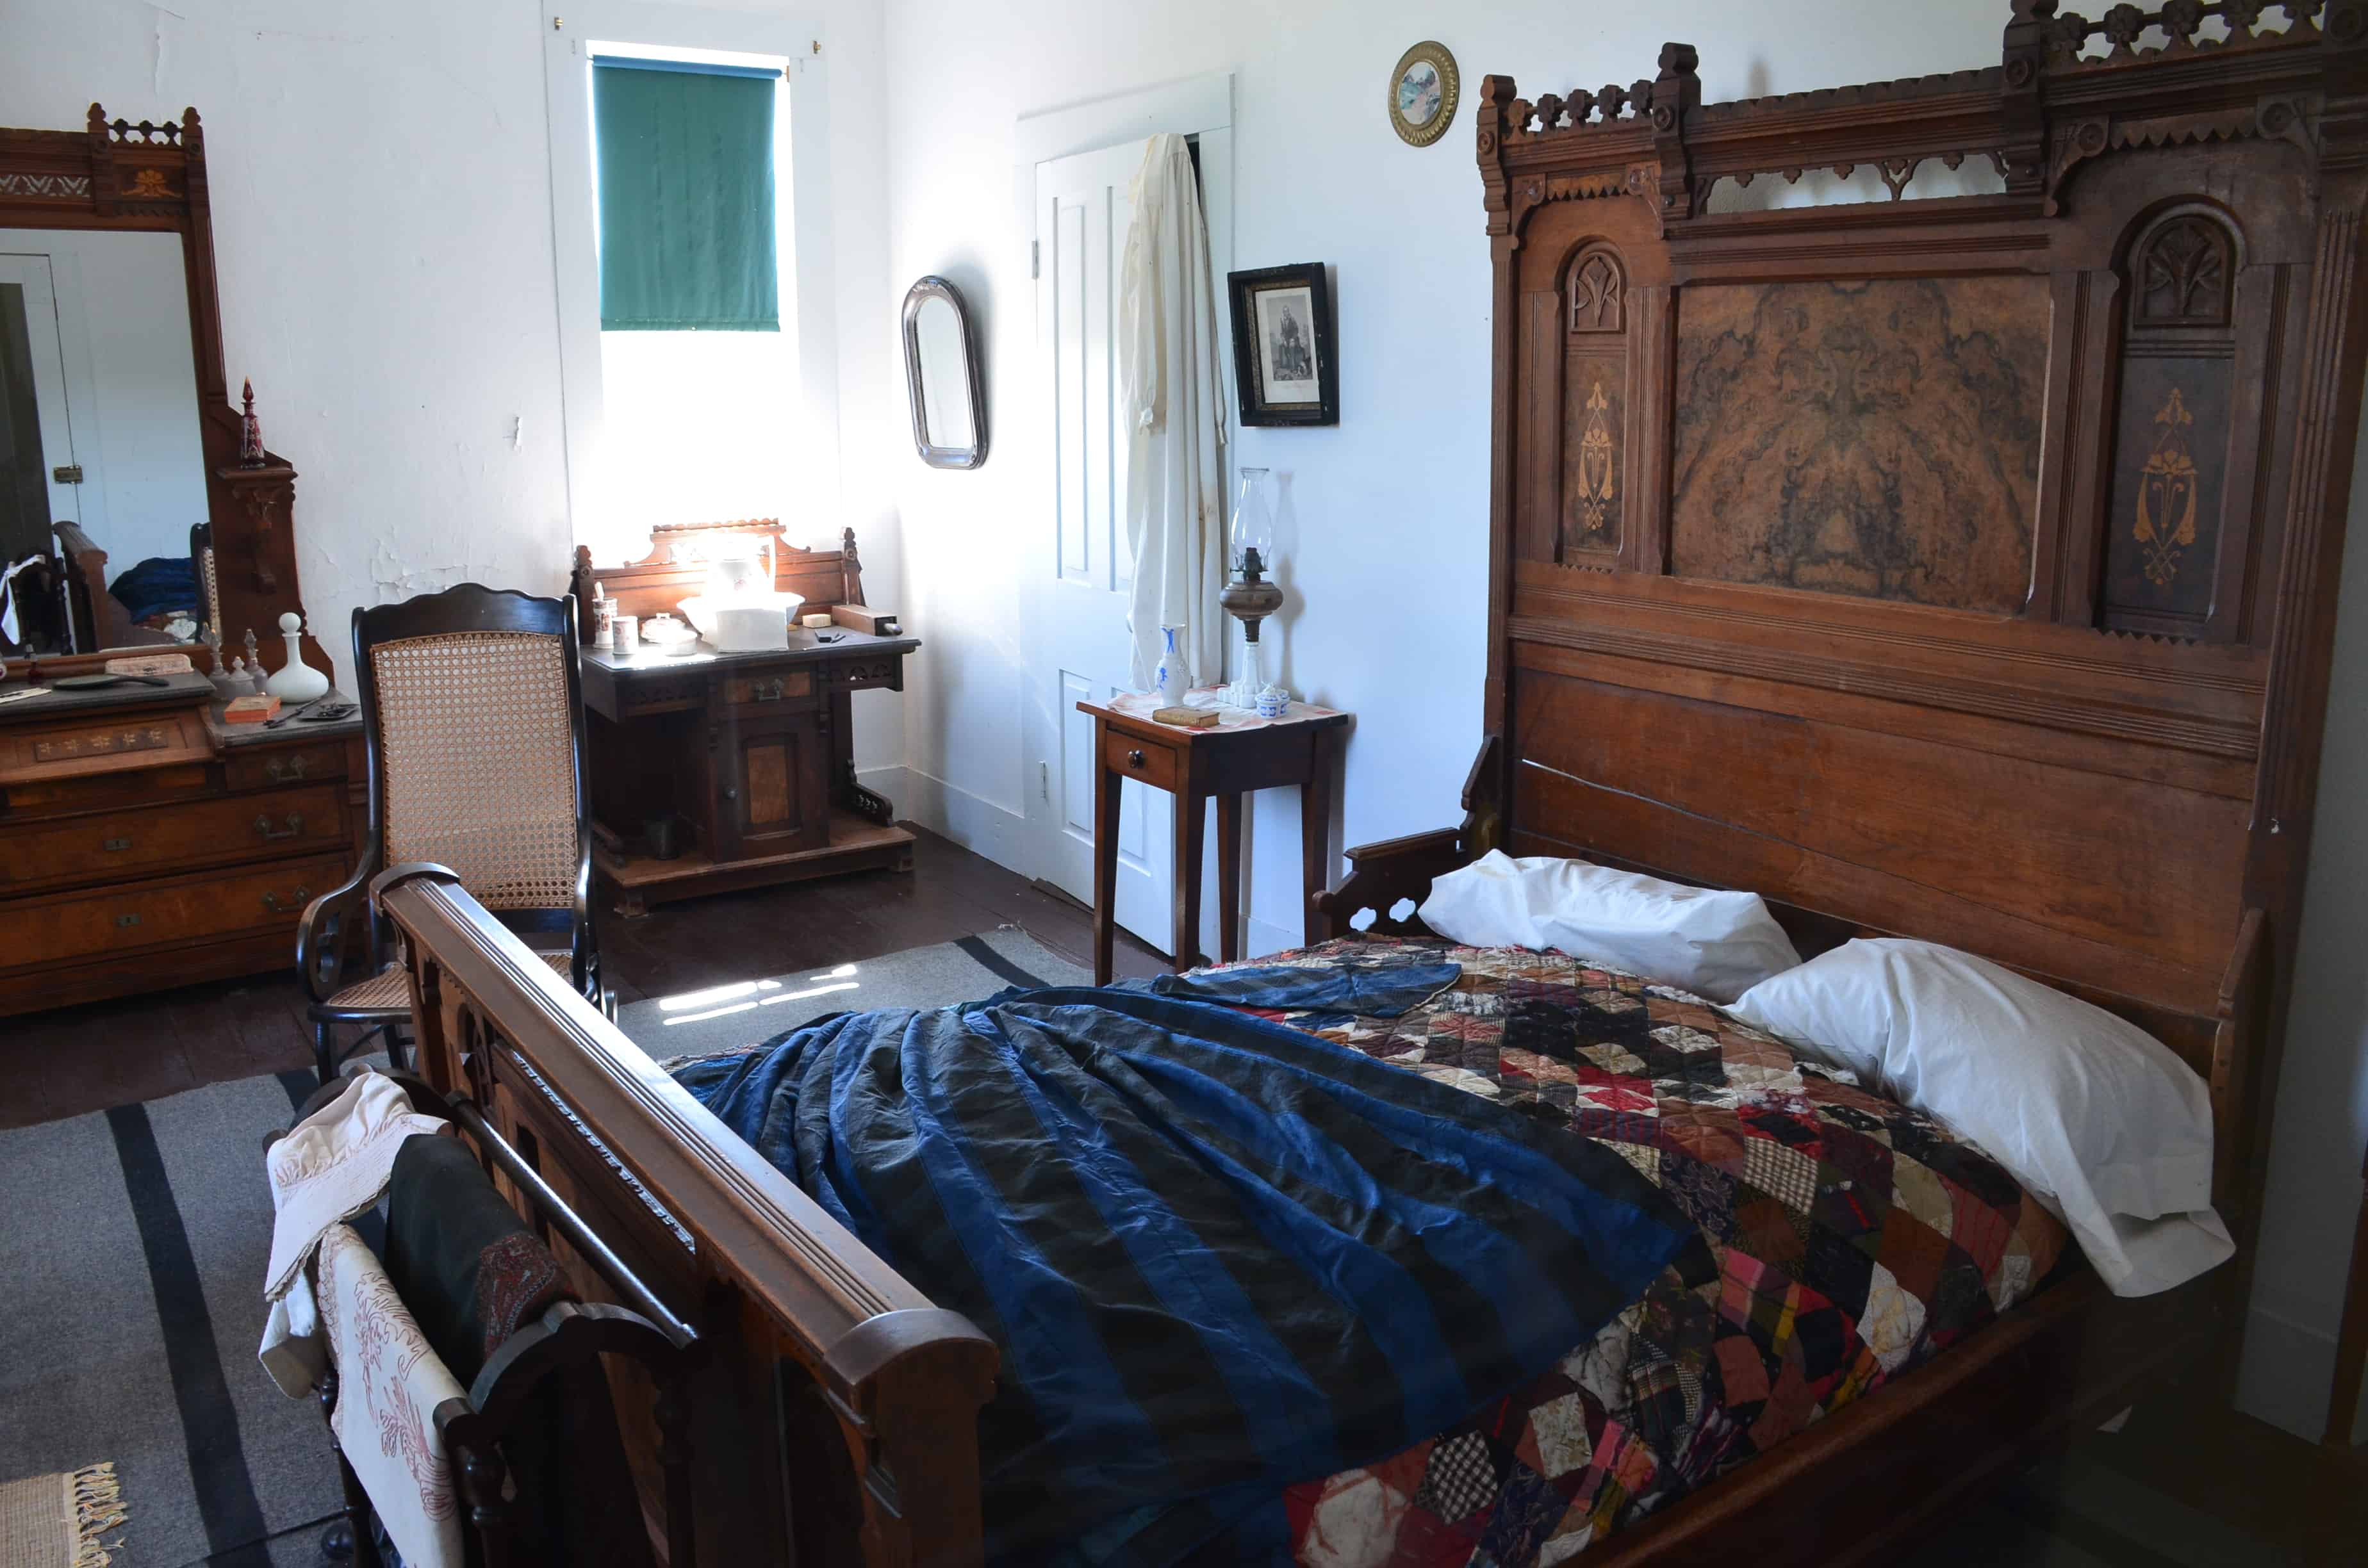 Bedroom in the captain's quarters at Fort Laramie National Historic Site in Wyoming